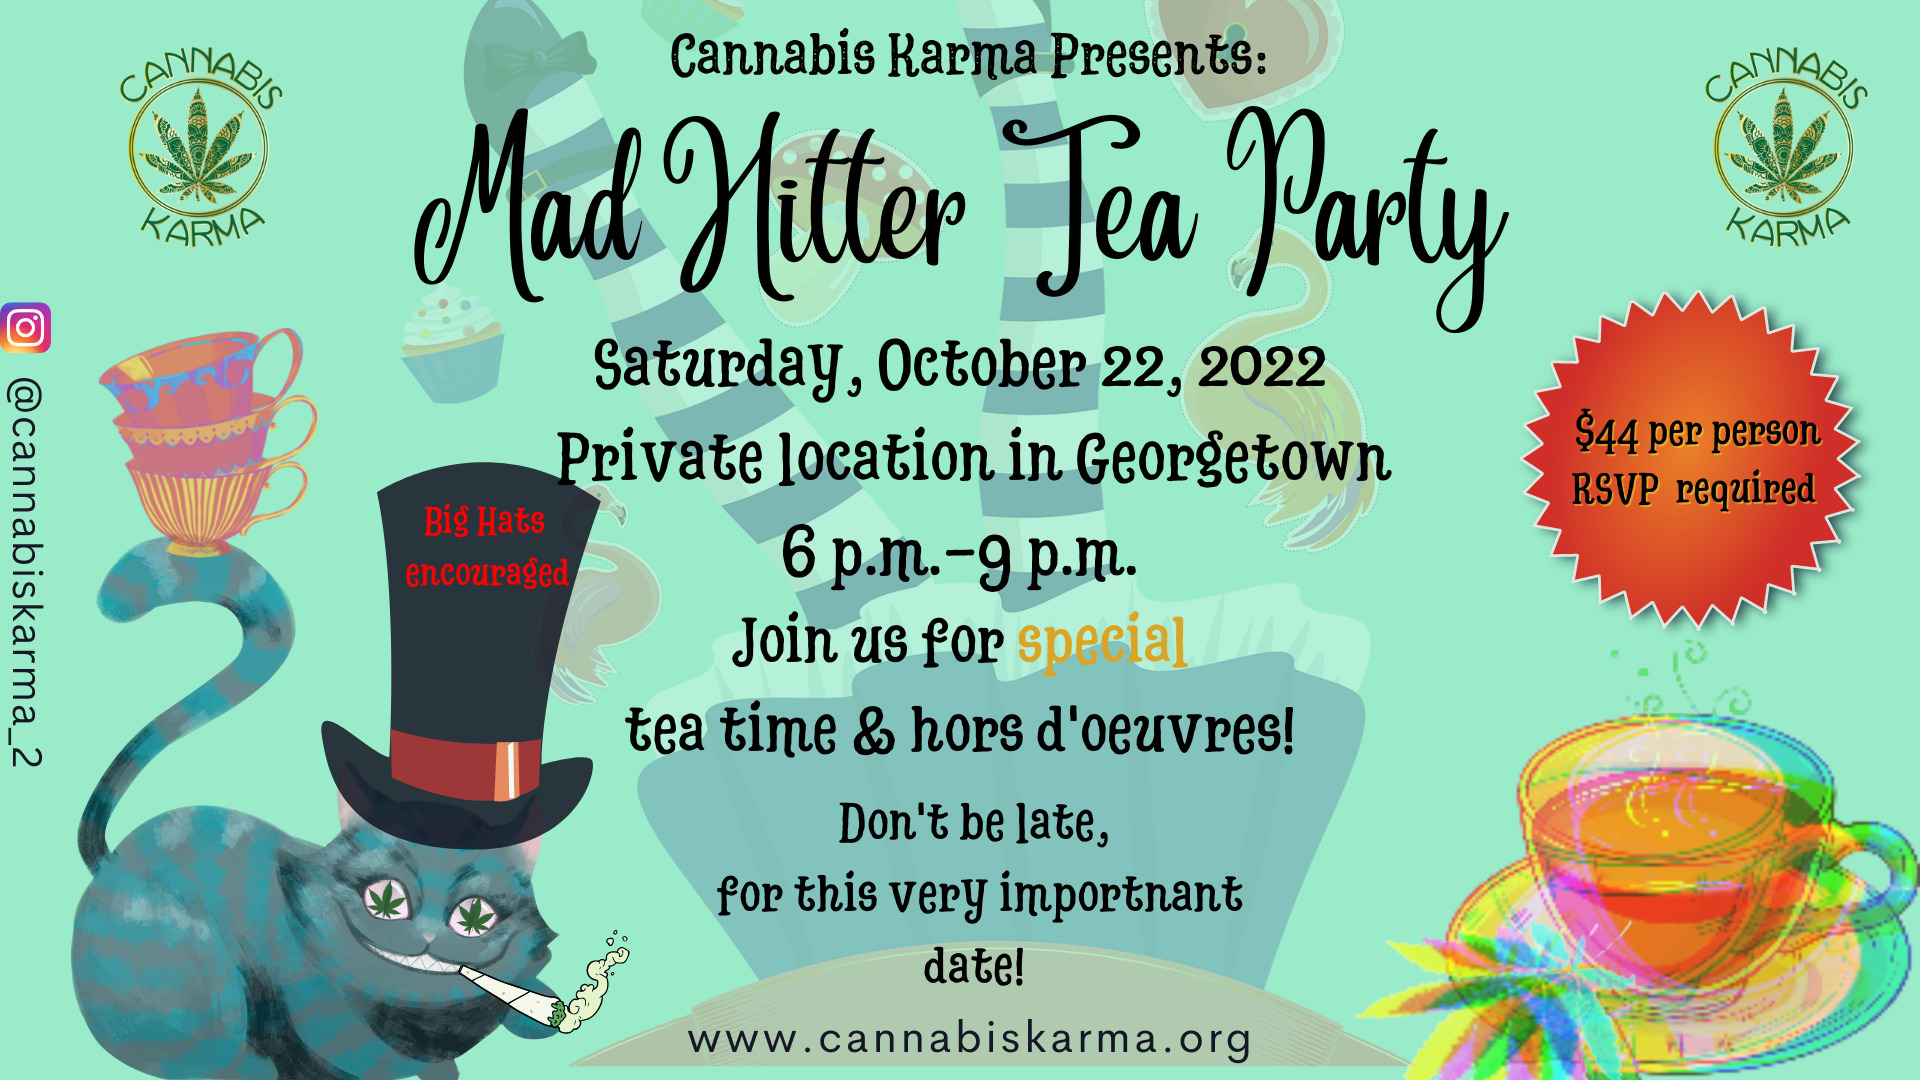 The Mad Hitter Tea Party